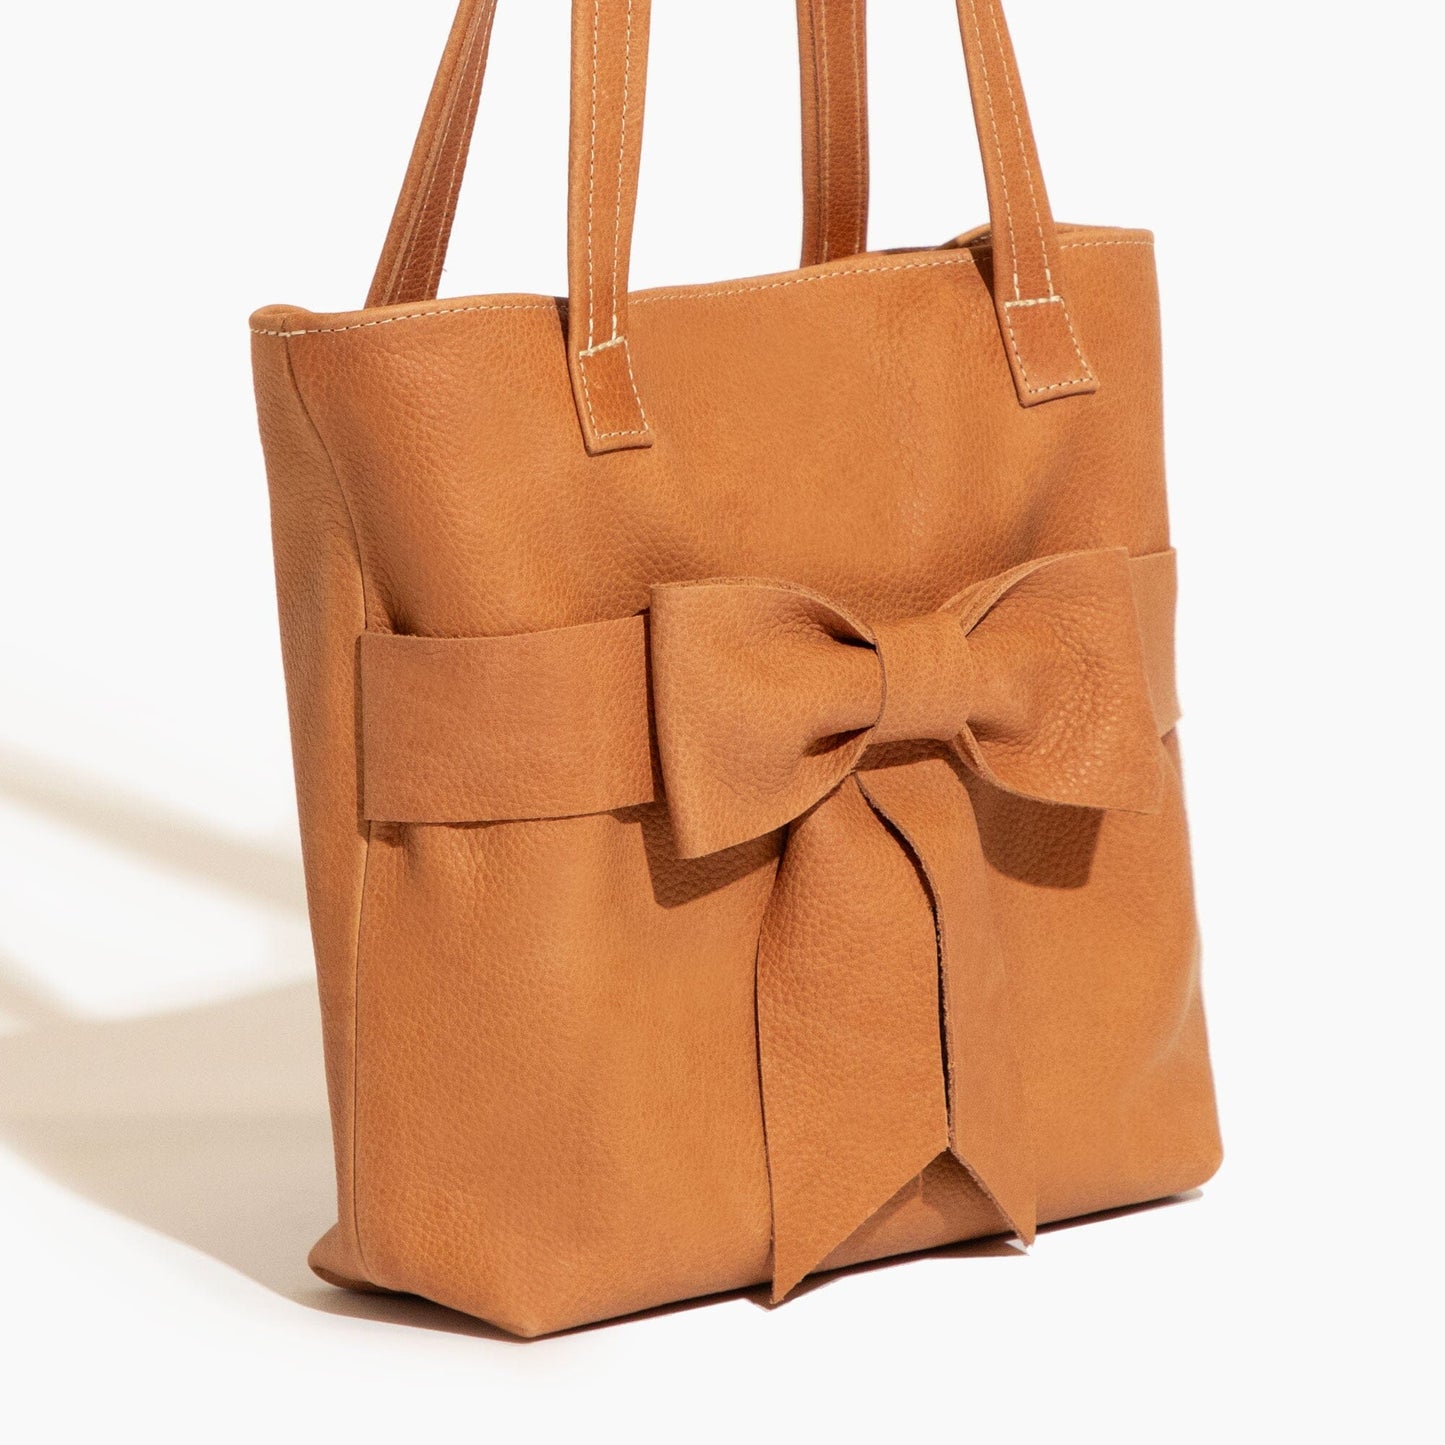 Zion Put A Bow On It Leather Tote Leather Tote In House Bag 